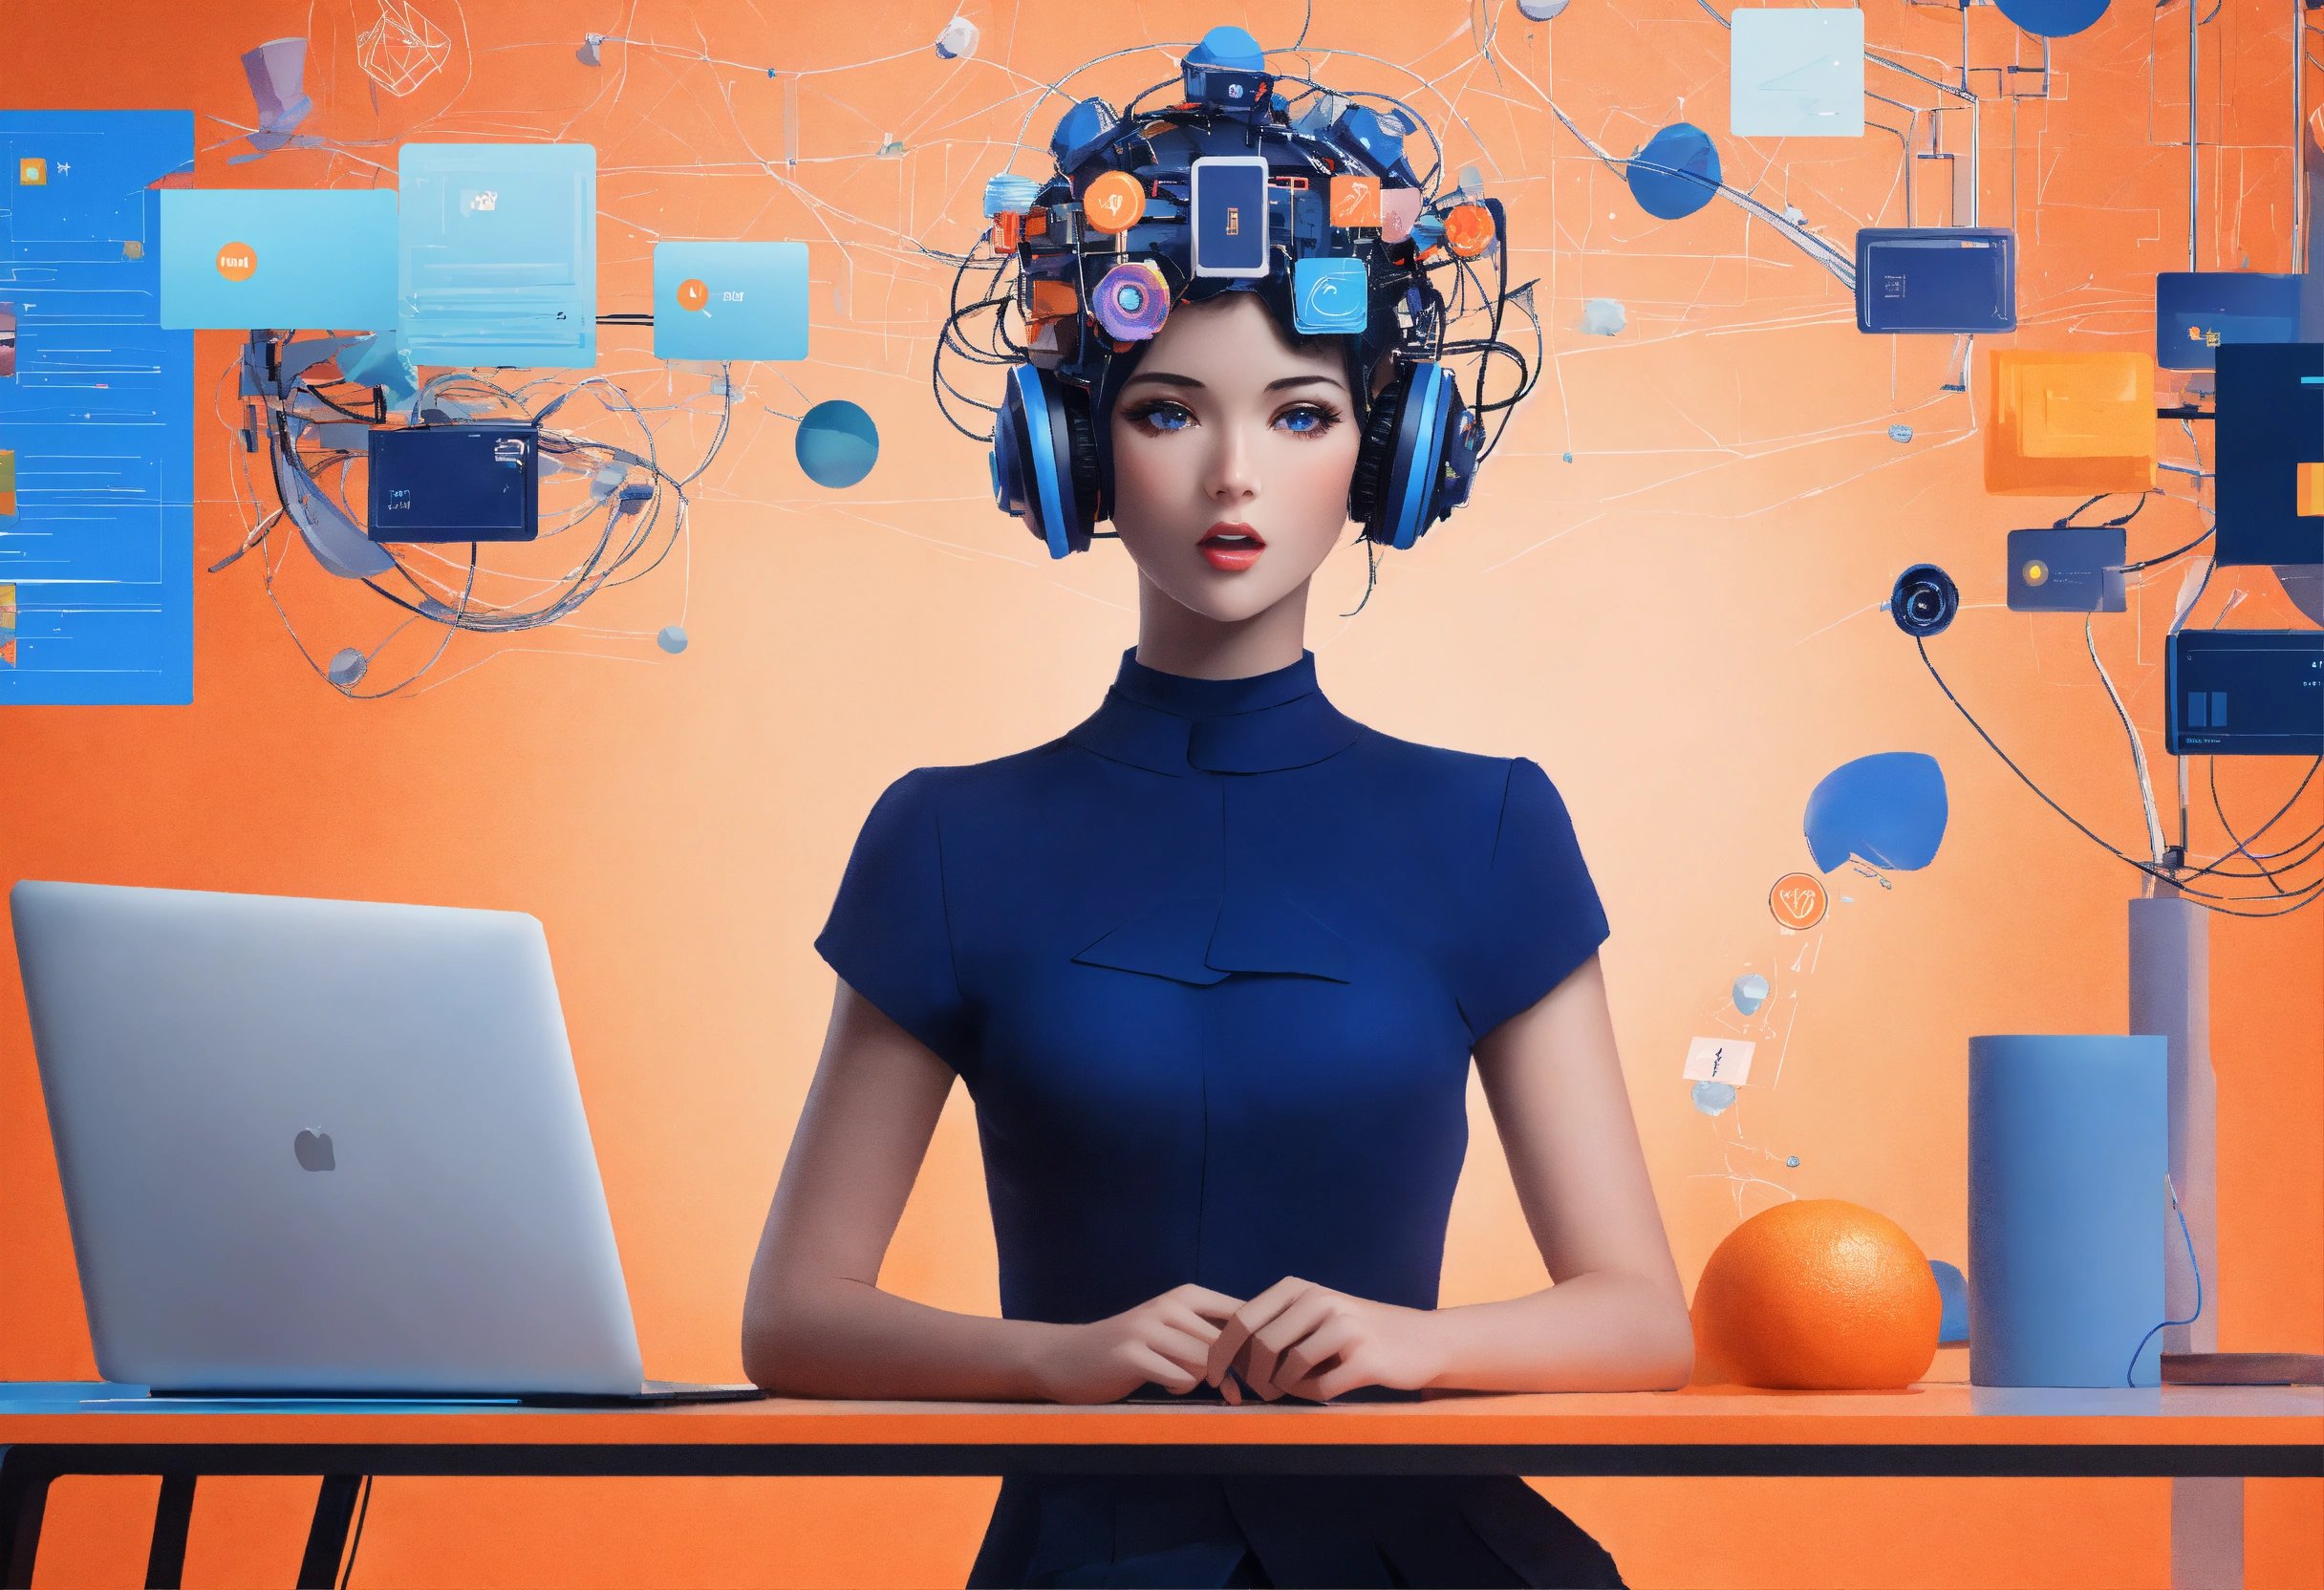 person sitting at a desk. The person’s head is replaced by an intricate mechanical structure filled with wires and electronic components. The face area is obscured by a blank square, giving an anonymous or non-human appearance. On the desk are a closed laptop to the left of the figure, an orange to the right front side, and a blue cup to the far right. The background is bright orange with various graphical interfaces floating around; these include data visualizations and interface windows in blues and whites. The overall theme appears to be technology-centric or related to artificial intelligence.